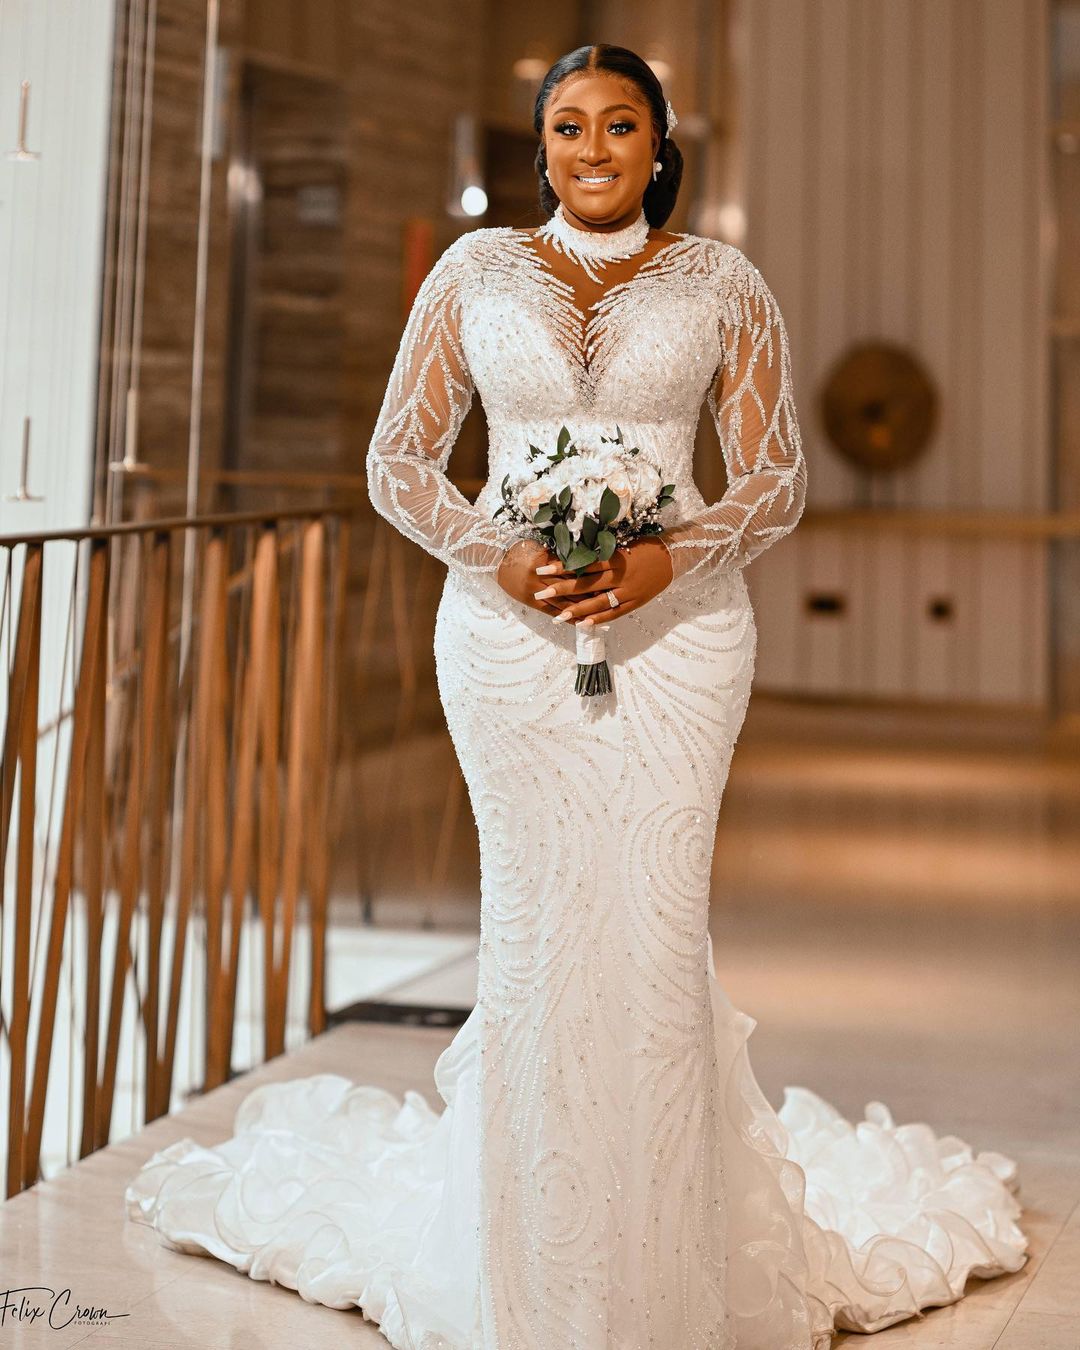 Latest Wedding Gowns - 50 Top Wedding Dress Styles And Trends For 2022 -  Fashion - Nigeria